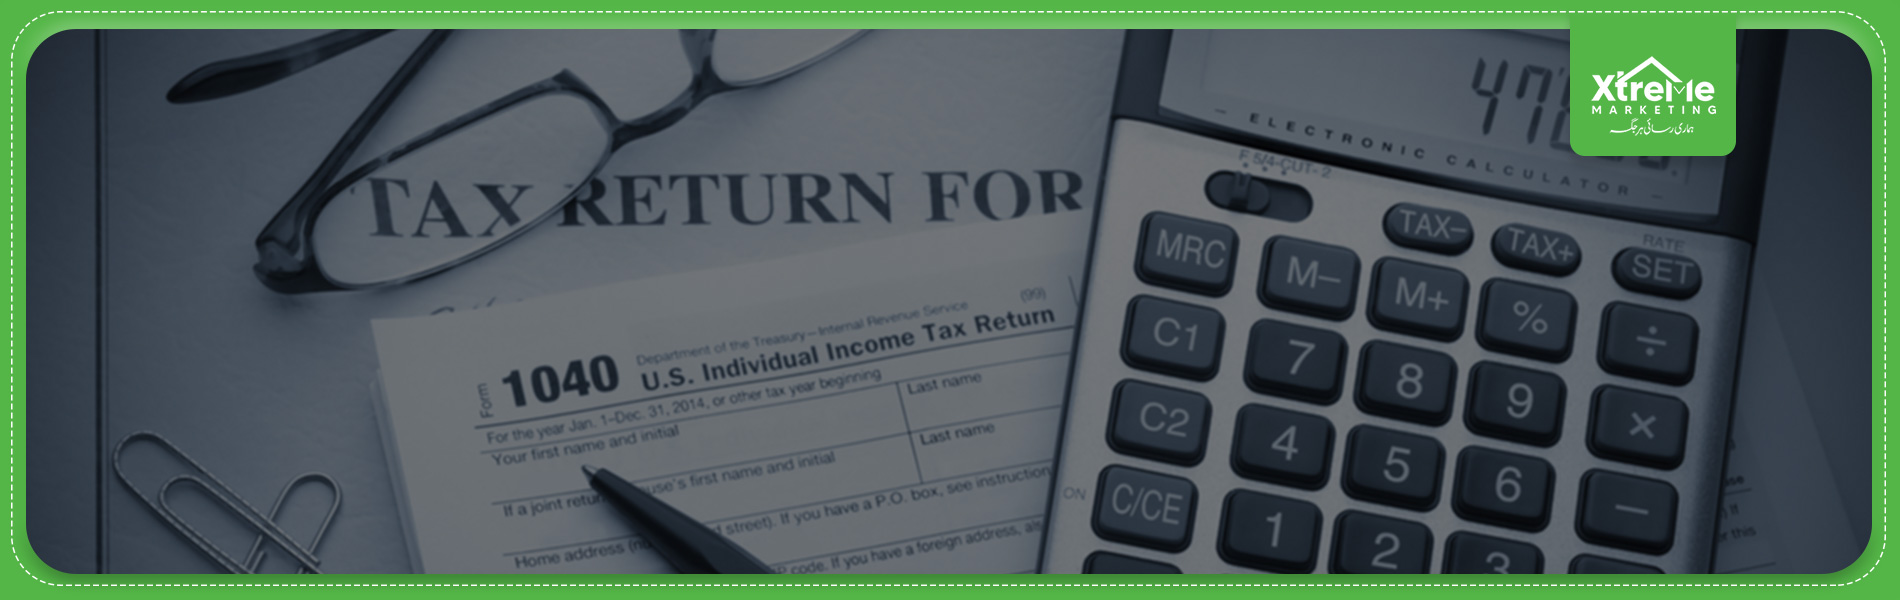 HOW-TO-FILE-INCOME-TAX-RETURN-IN-PAKISTAN.jpg